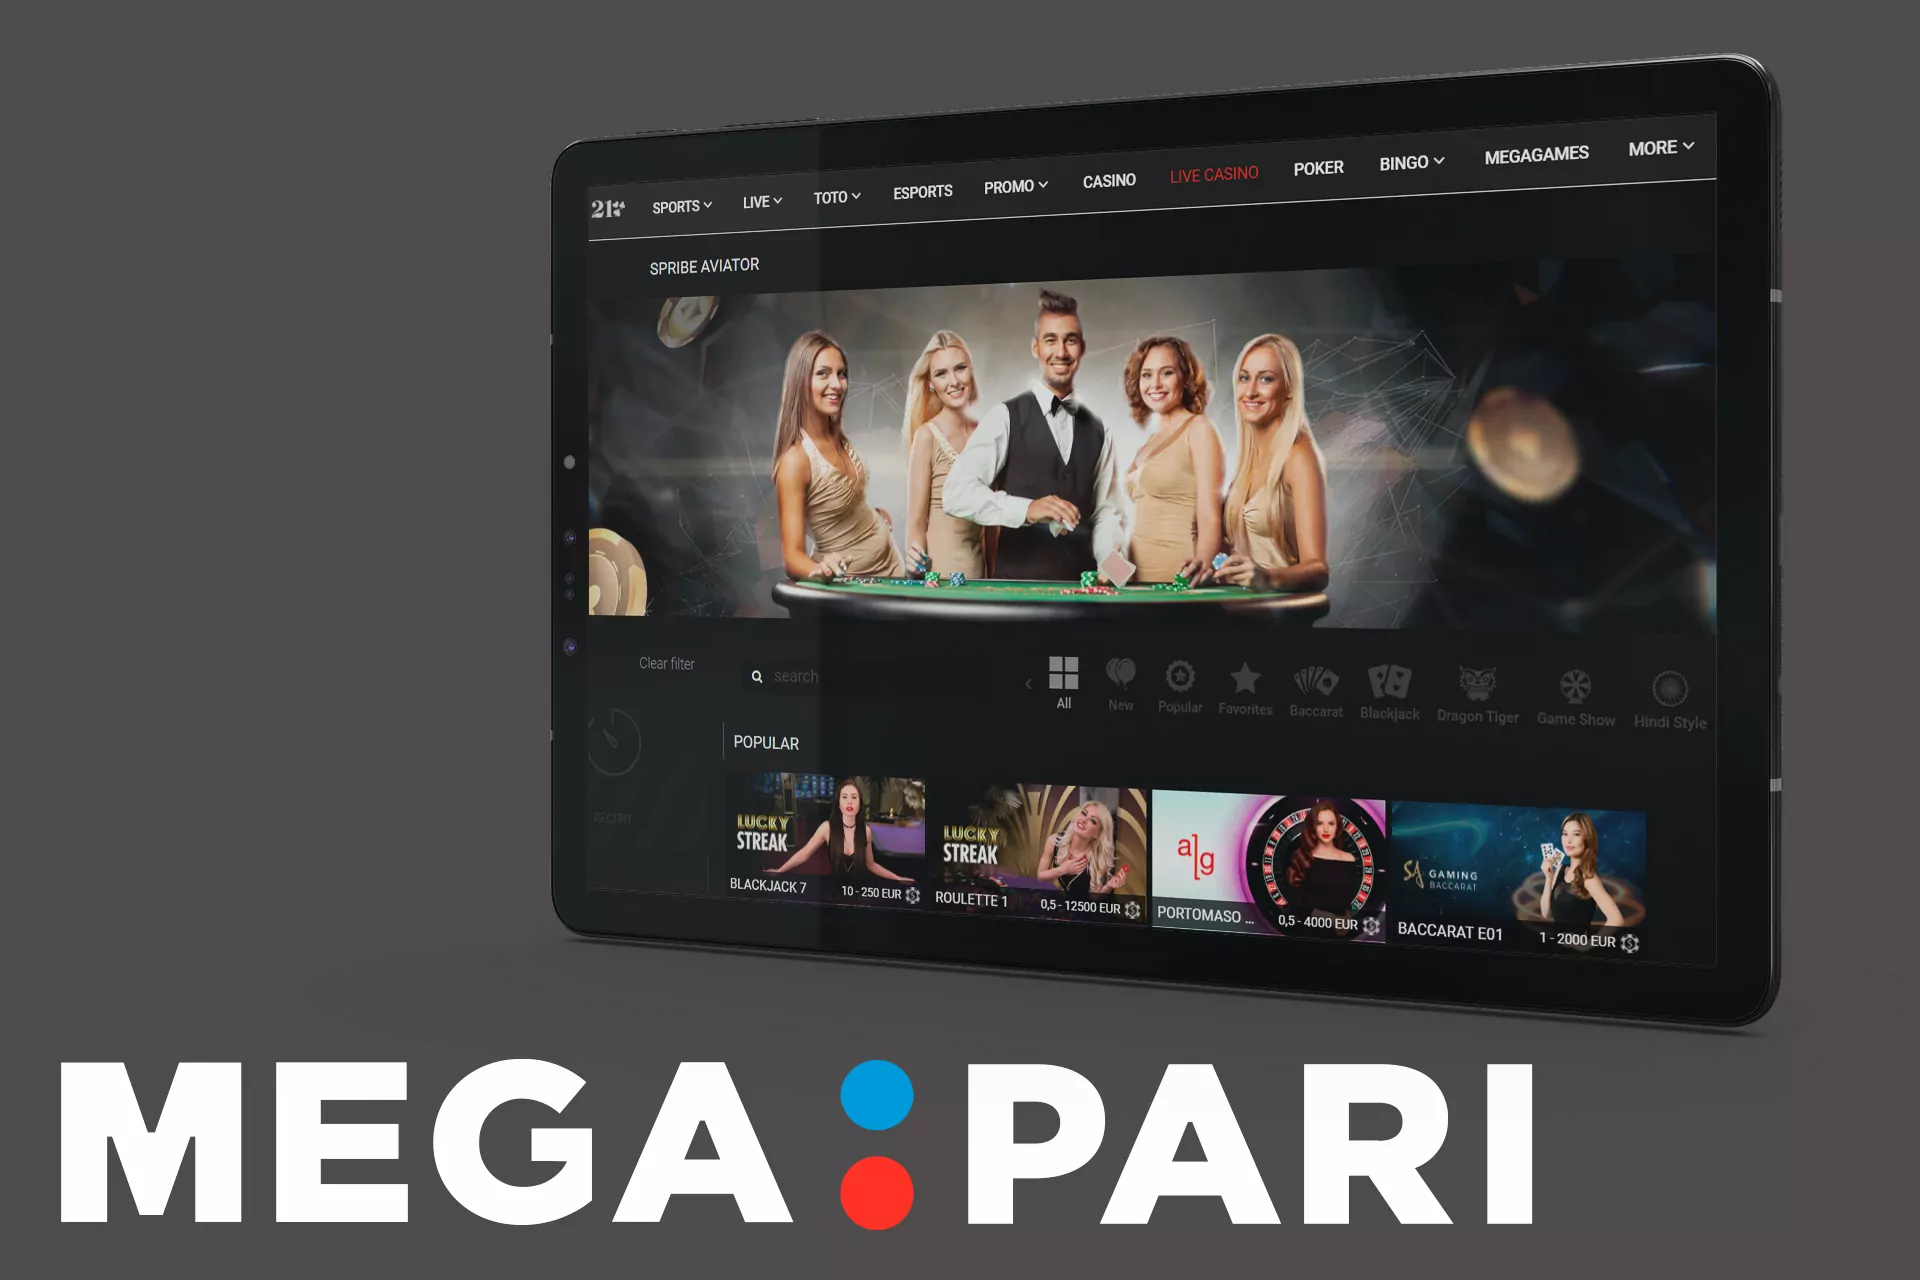 In the Megapari Live Casino section you can play games with real dealers.